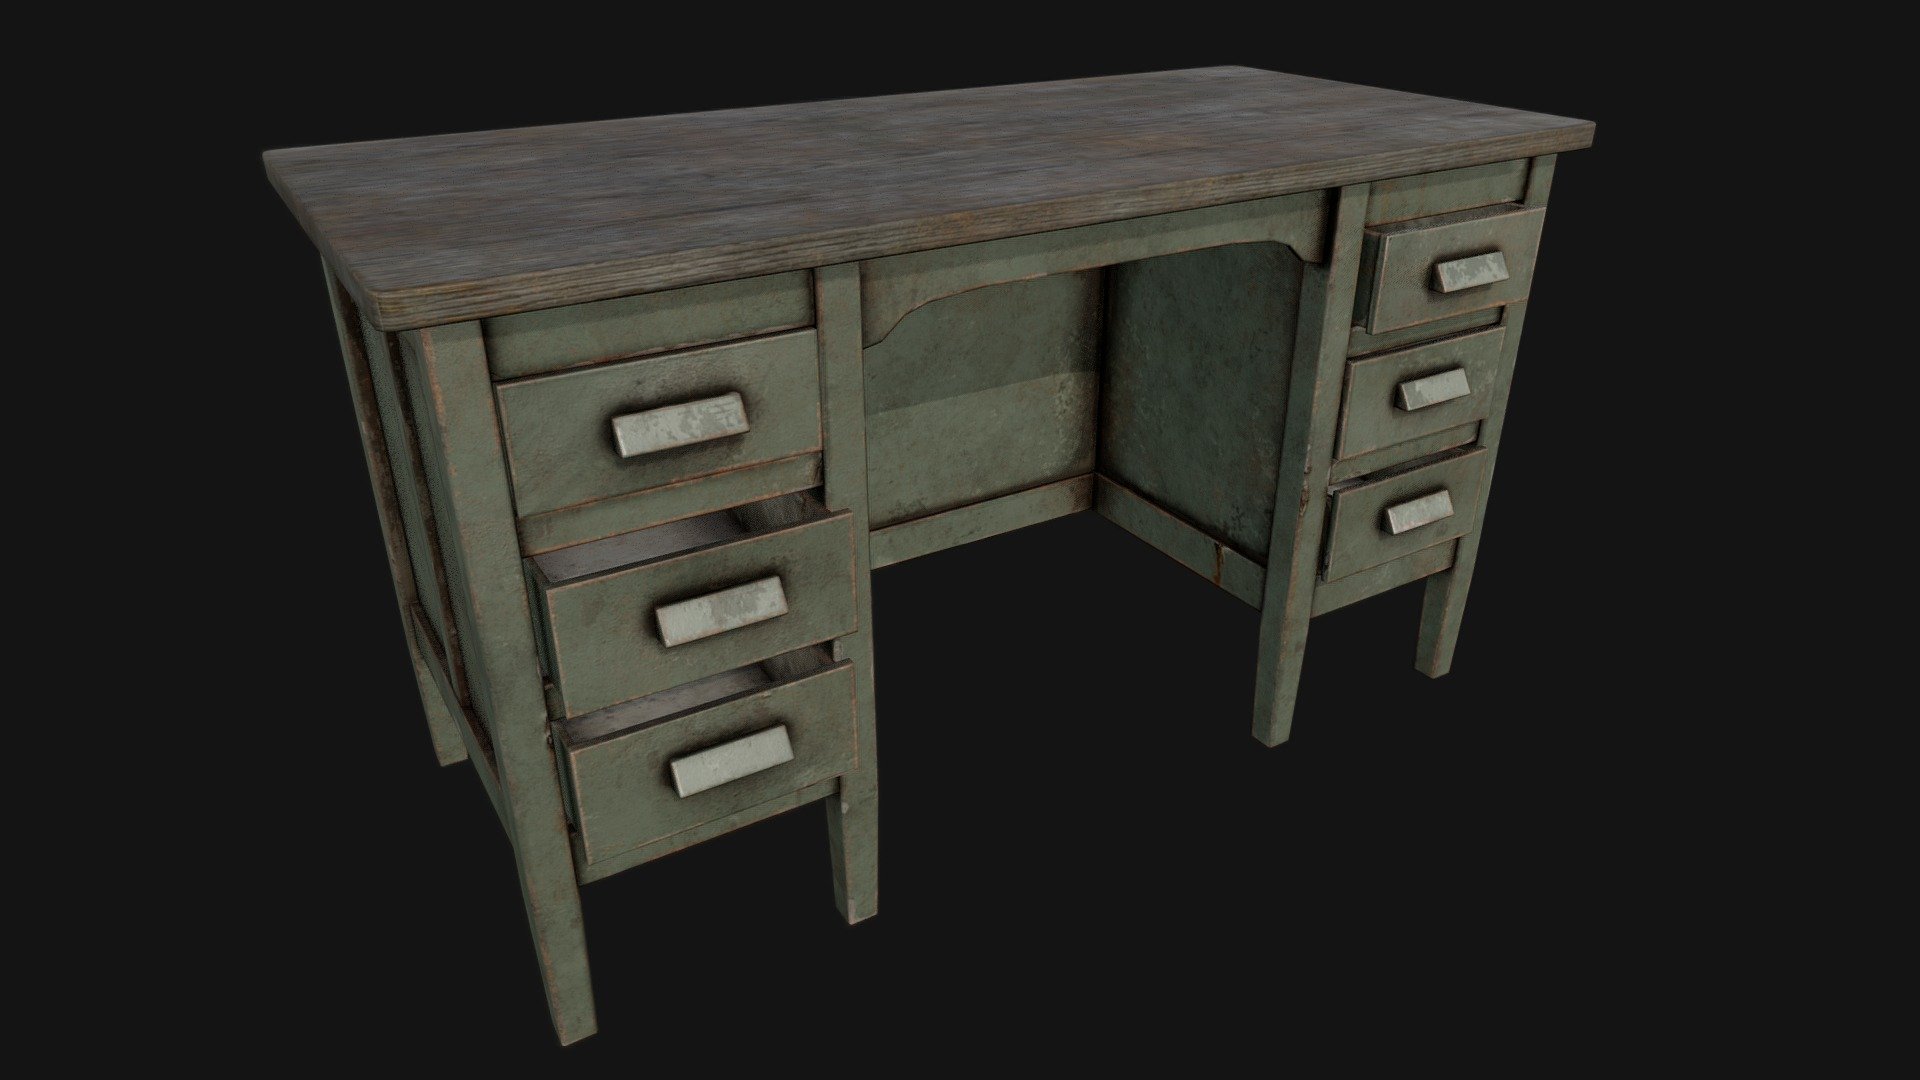 Old Office Table B - PBR

Very Detailed Low Poly Old Office Table with High-Quality PBR Texturing. 

Fits perfect for any PBR game as Decoration / Furniture in like Post Apocalyptic Environment or Horror Games for example

The Drawers are separated so that they can be opened.

Created with 3DSMAX, Zbrush and Substance Painter.

Standard Textures
Base Color, Metallic, Roughness, Height, AO, Normal, Maps

Unreal 4 Textures
Base Color, Normal, OcclusionRoughnessMetallic

Unity 5/2017 Textures
Albedo, SpecularSmoothness, Normal, and AO Maps

2x4096x4096 TGA Textures

Please Note, this PBR Textures Only. 

Low Poly Triangles 

1652 Tris
1288 Verts

File Formats :

.Max2018
.Max2017
.Max2016
.Max2015
.FBX
.OBJ
.3DS
.DAE - Old Office Table B - PBR - Buy Royalty Free 3D model by GamePoly (@triix3d) 3d model